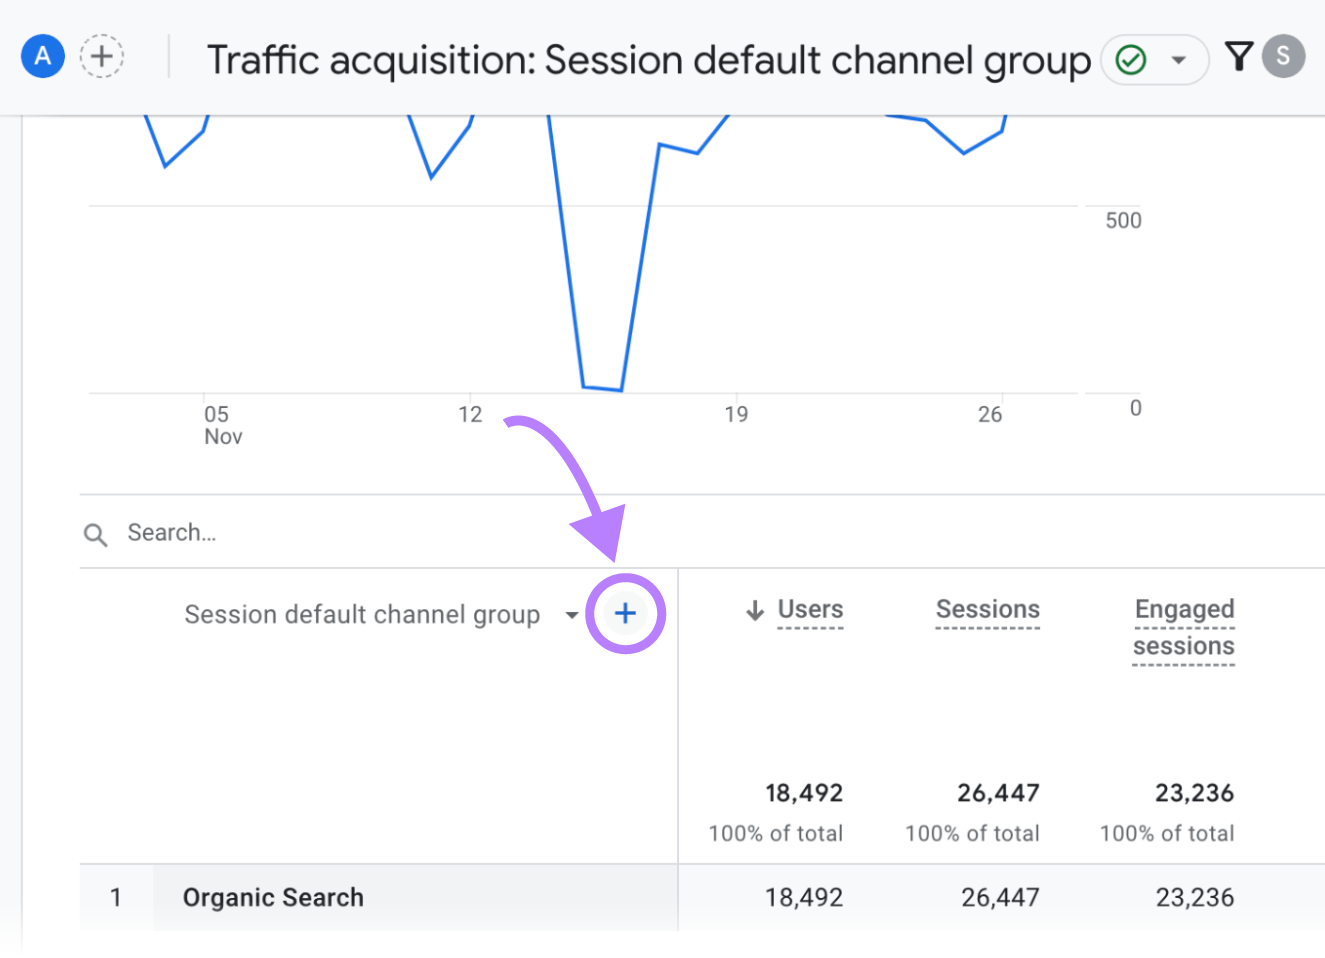 “+” button highlighted next to “Session default channel group"